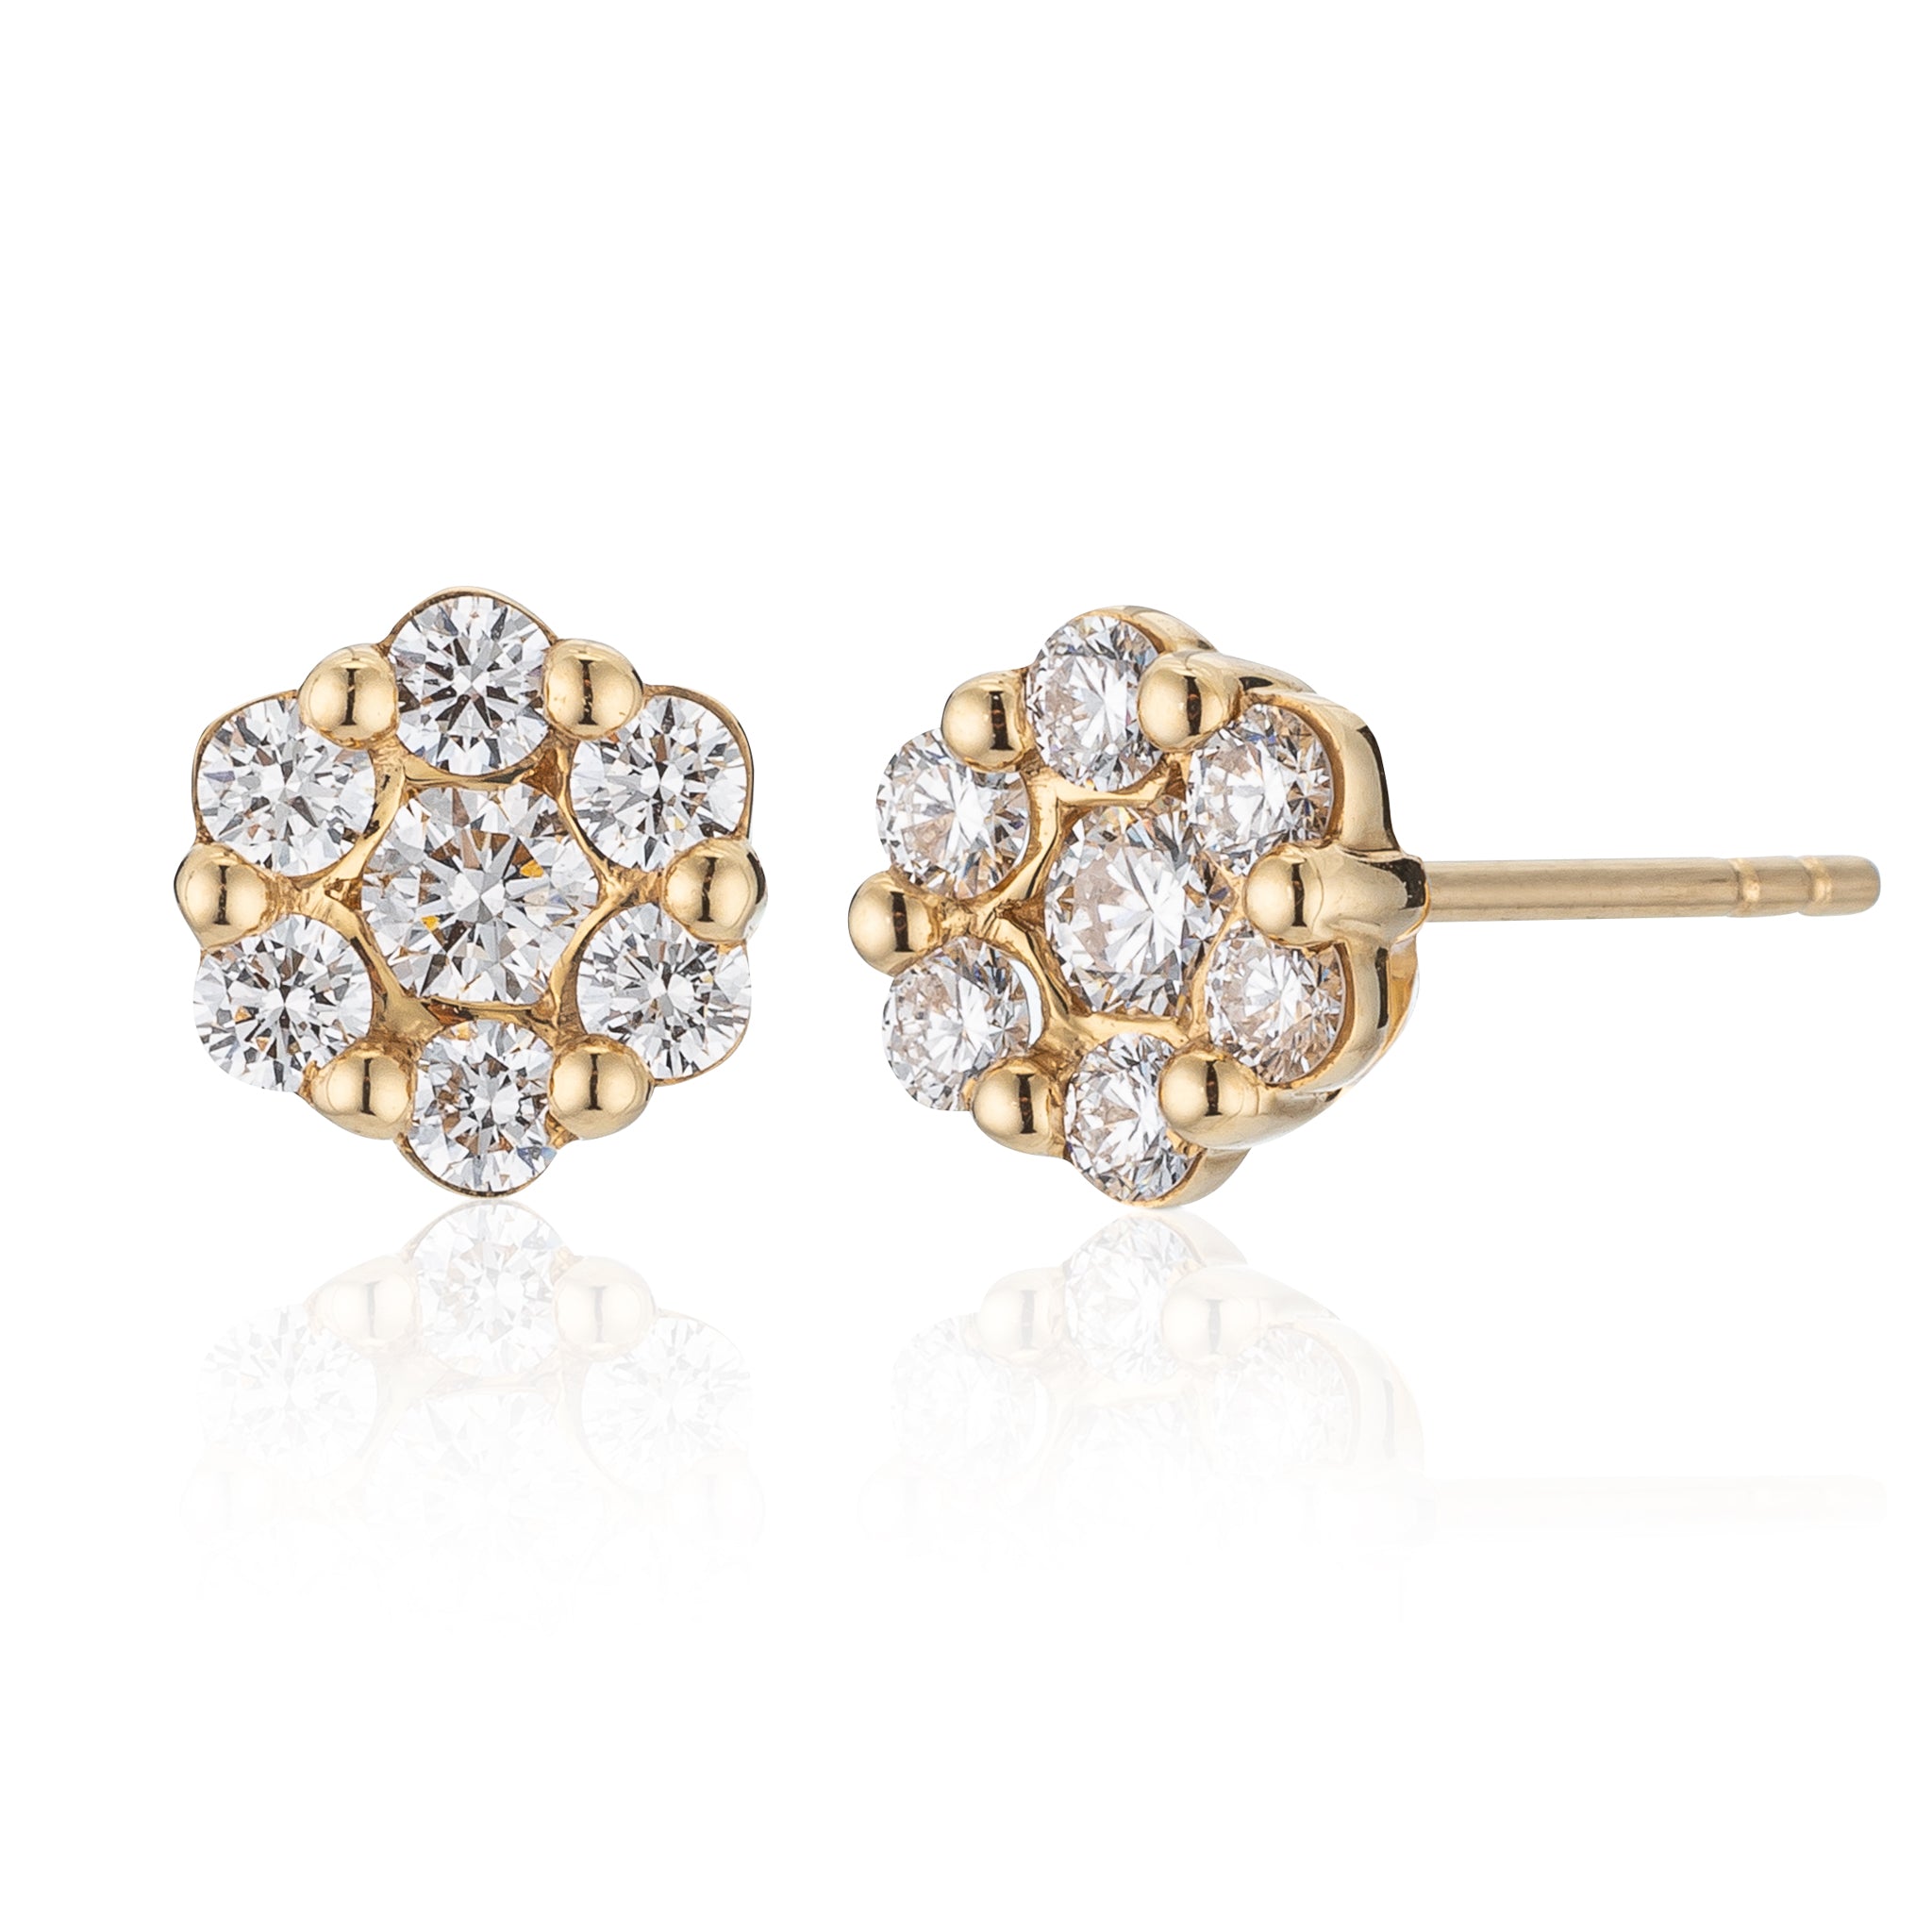 18 Karat Yellow Gold Floral Stud Earrings 1.55cts